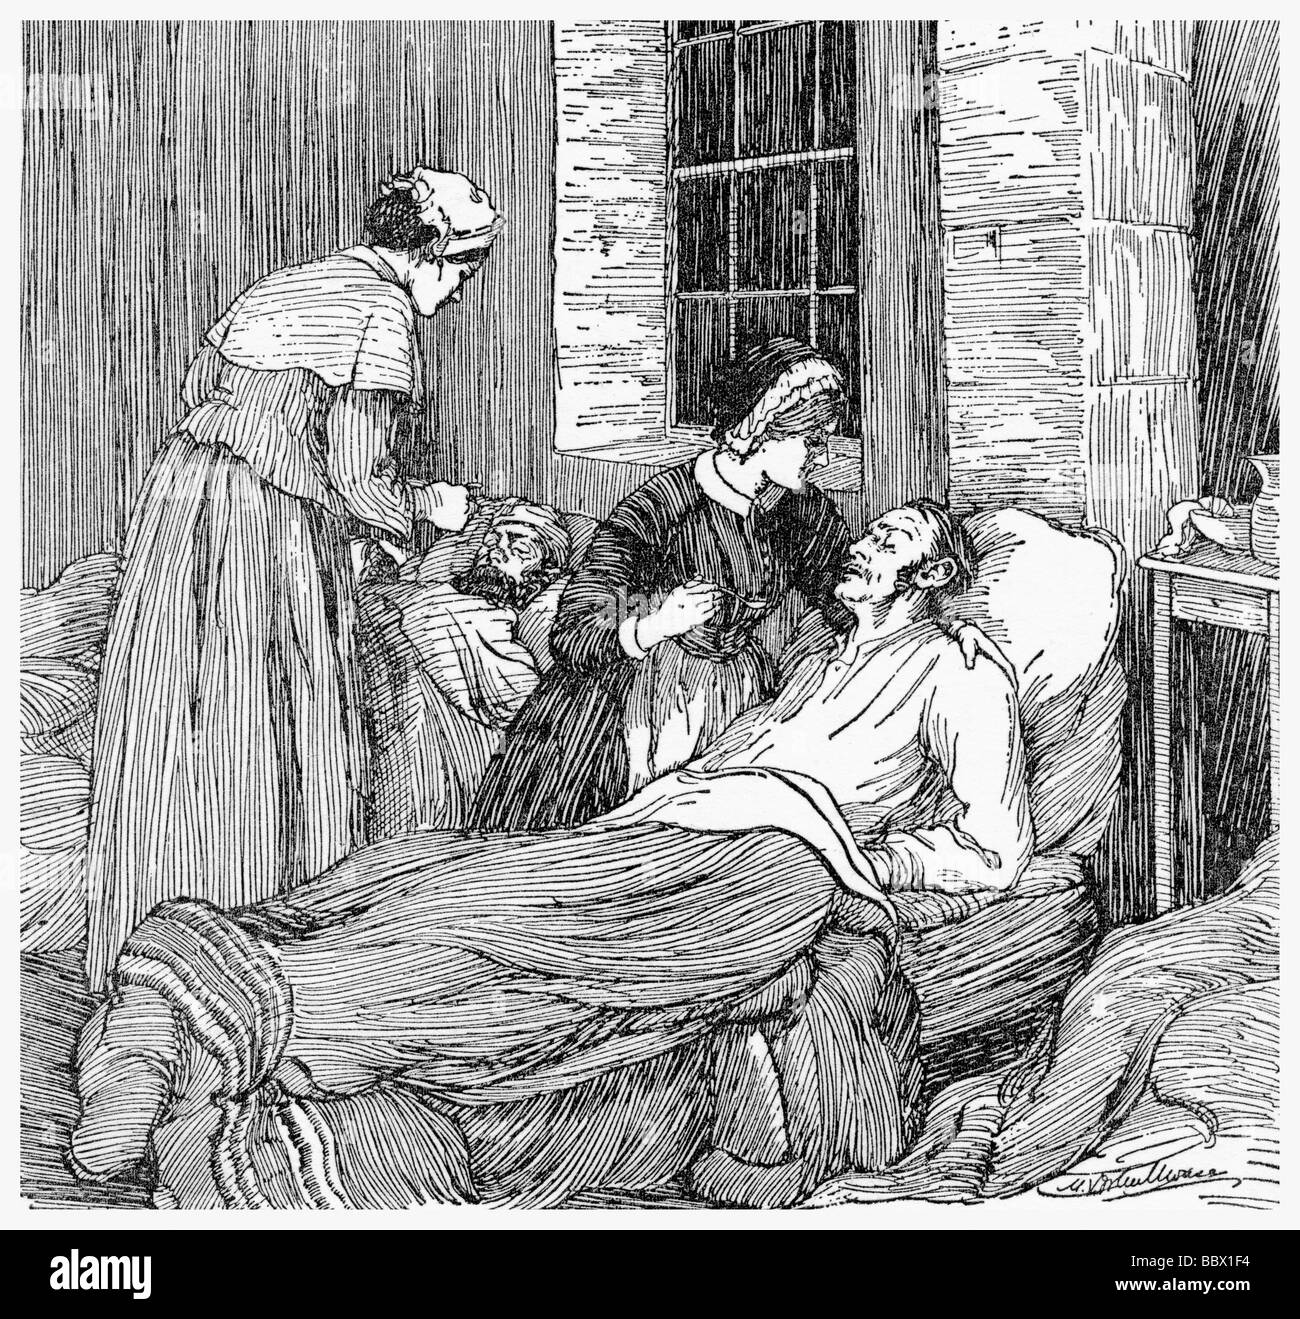 Florence Nightingale administers medicine to a severely wounded soldier during the Crimean War. Stock Photo